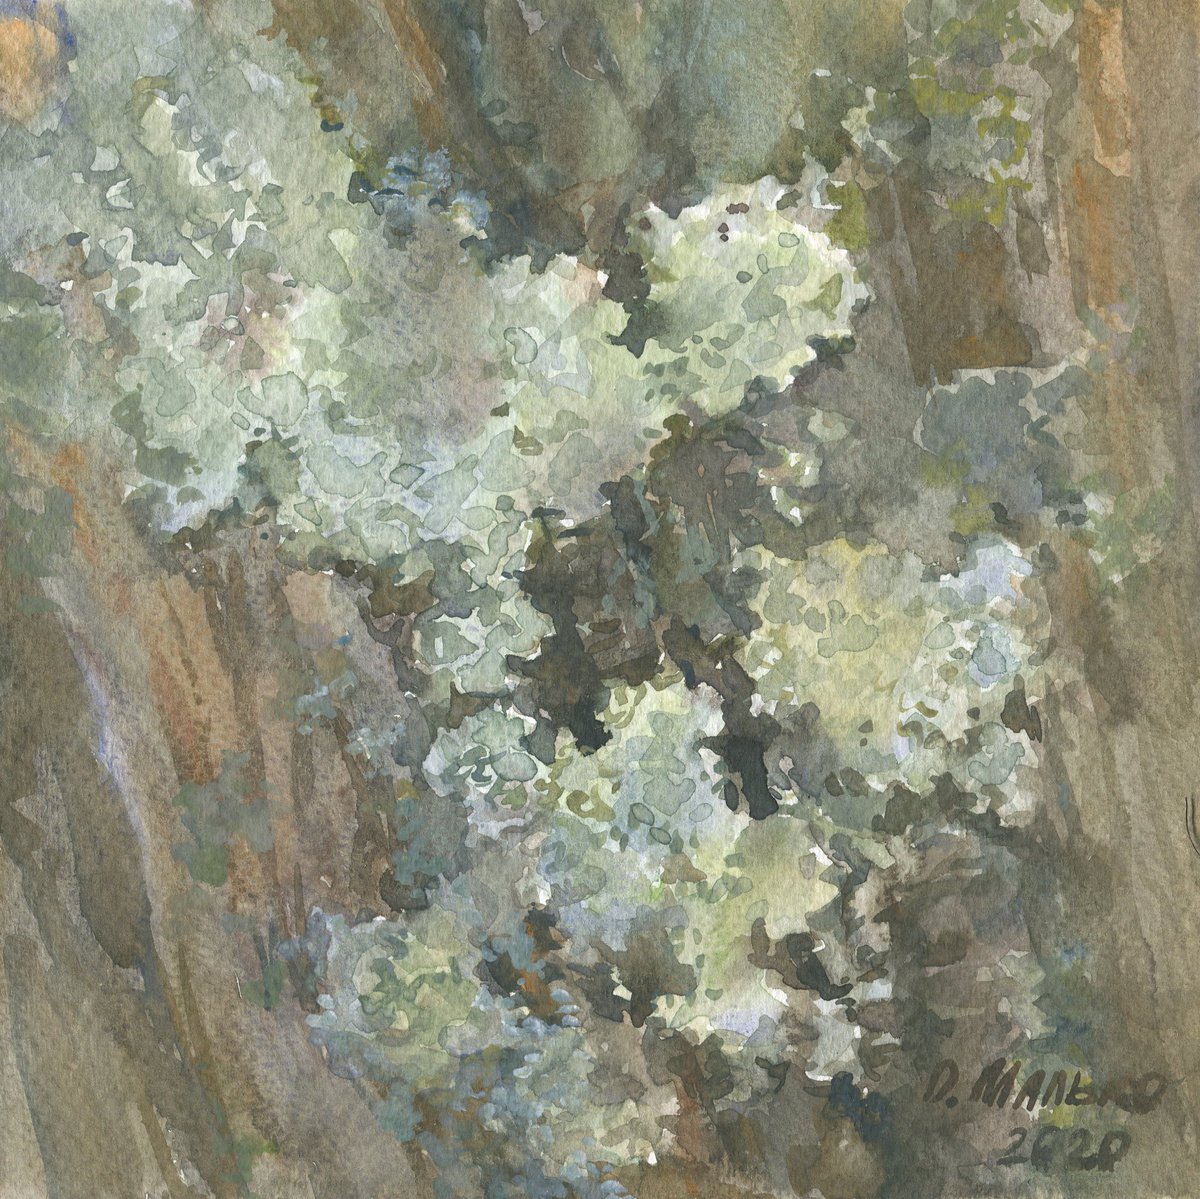 Big routes of little insects #3. Lichens on a tree bark. Original abstract watercolor by Olha Malko